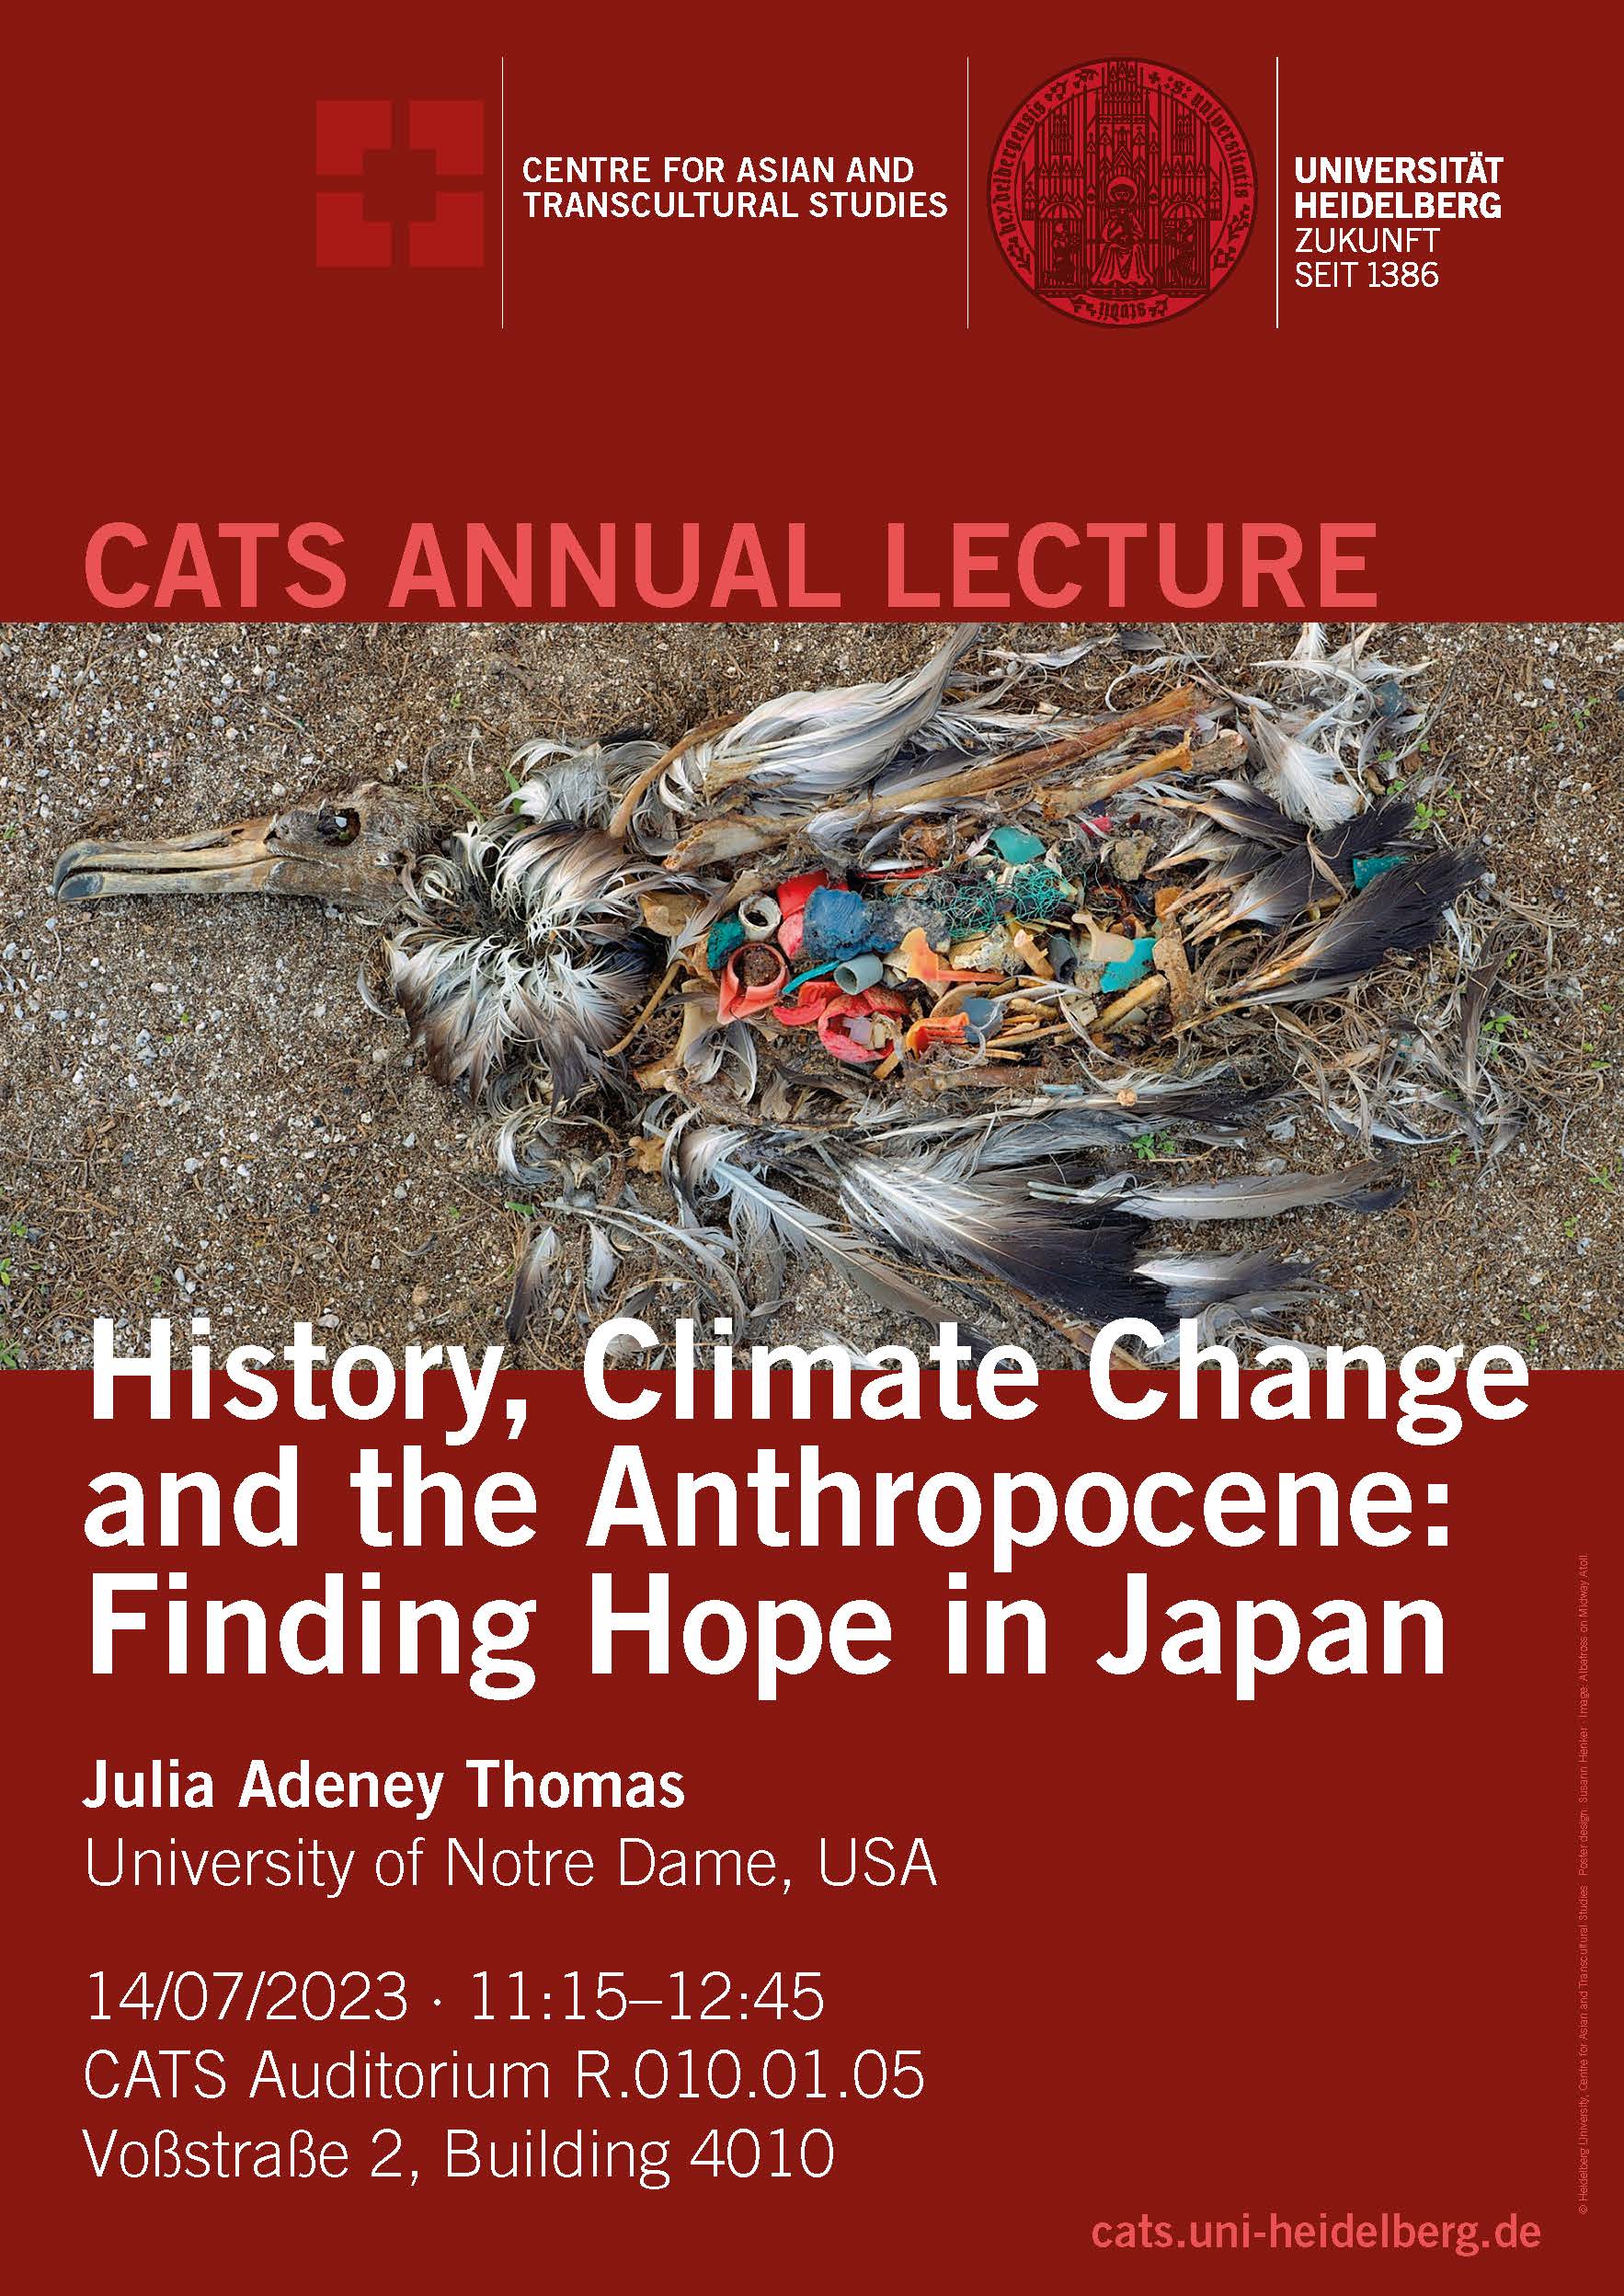 History, Climate Change and the Anthropocene: Finding Hope in Japan